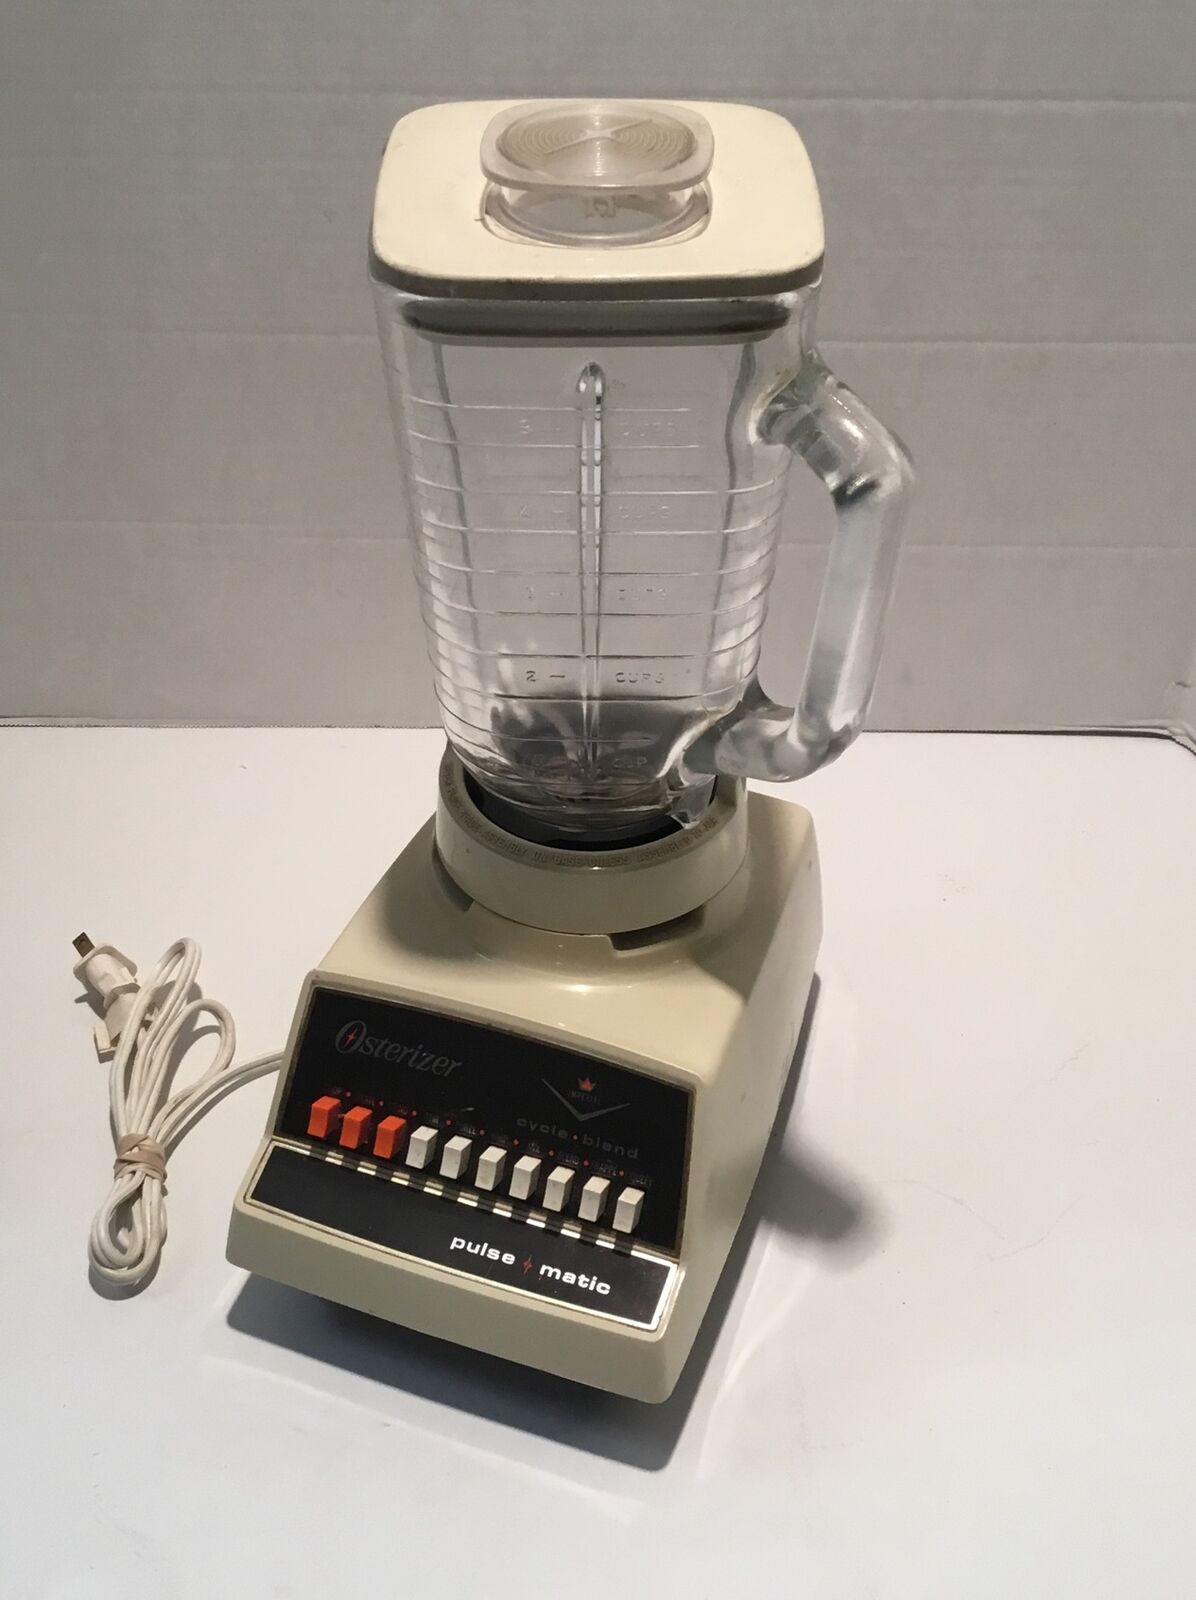 Vintage Osterizer 10 Cycle Blend Pulse Matic Imperial Blender Retro Tested